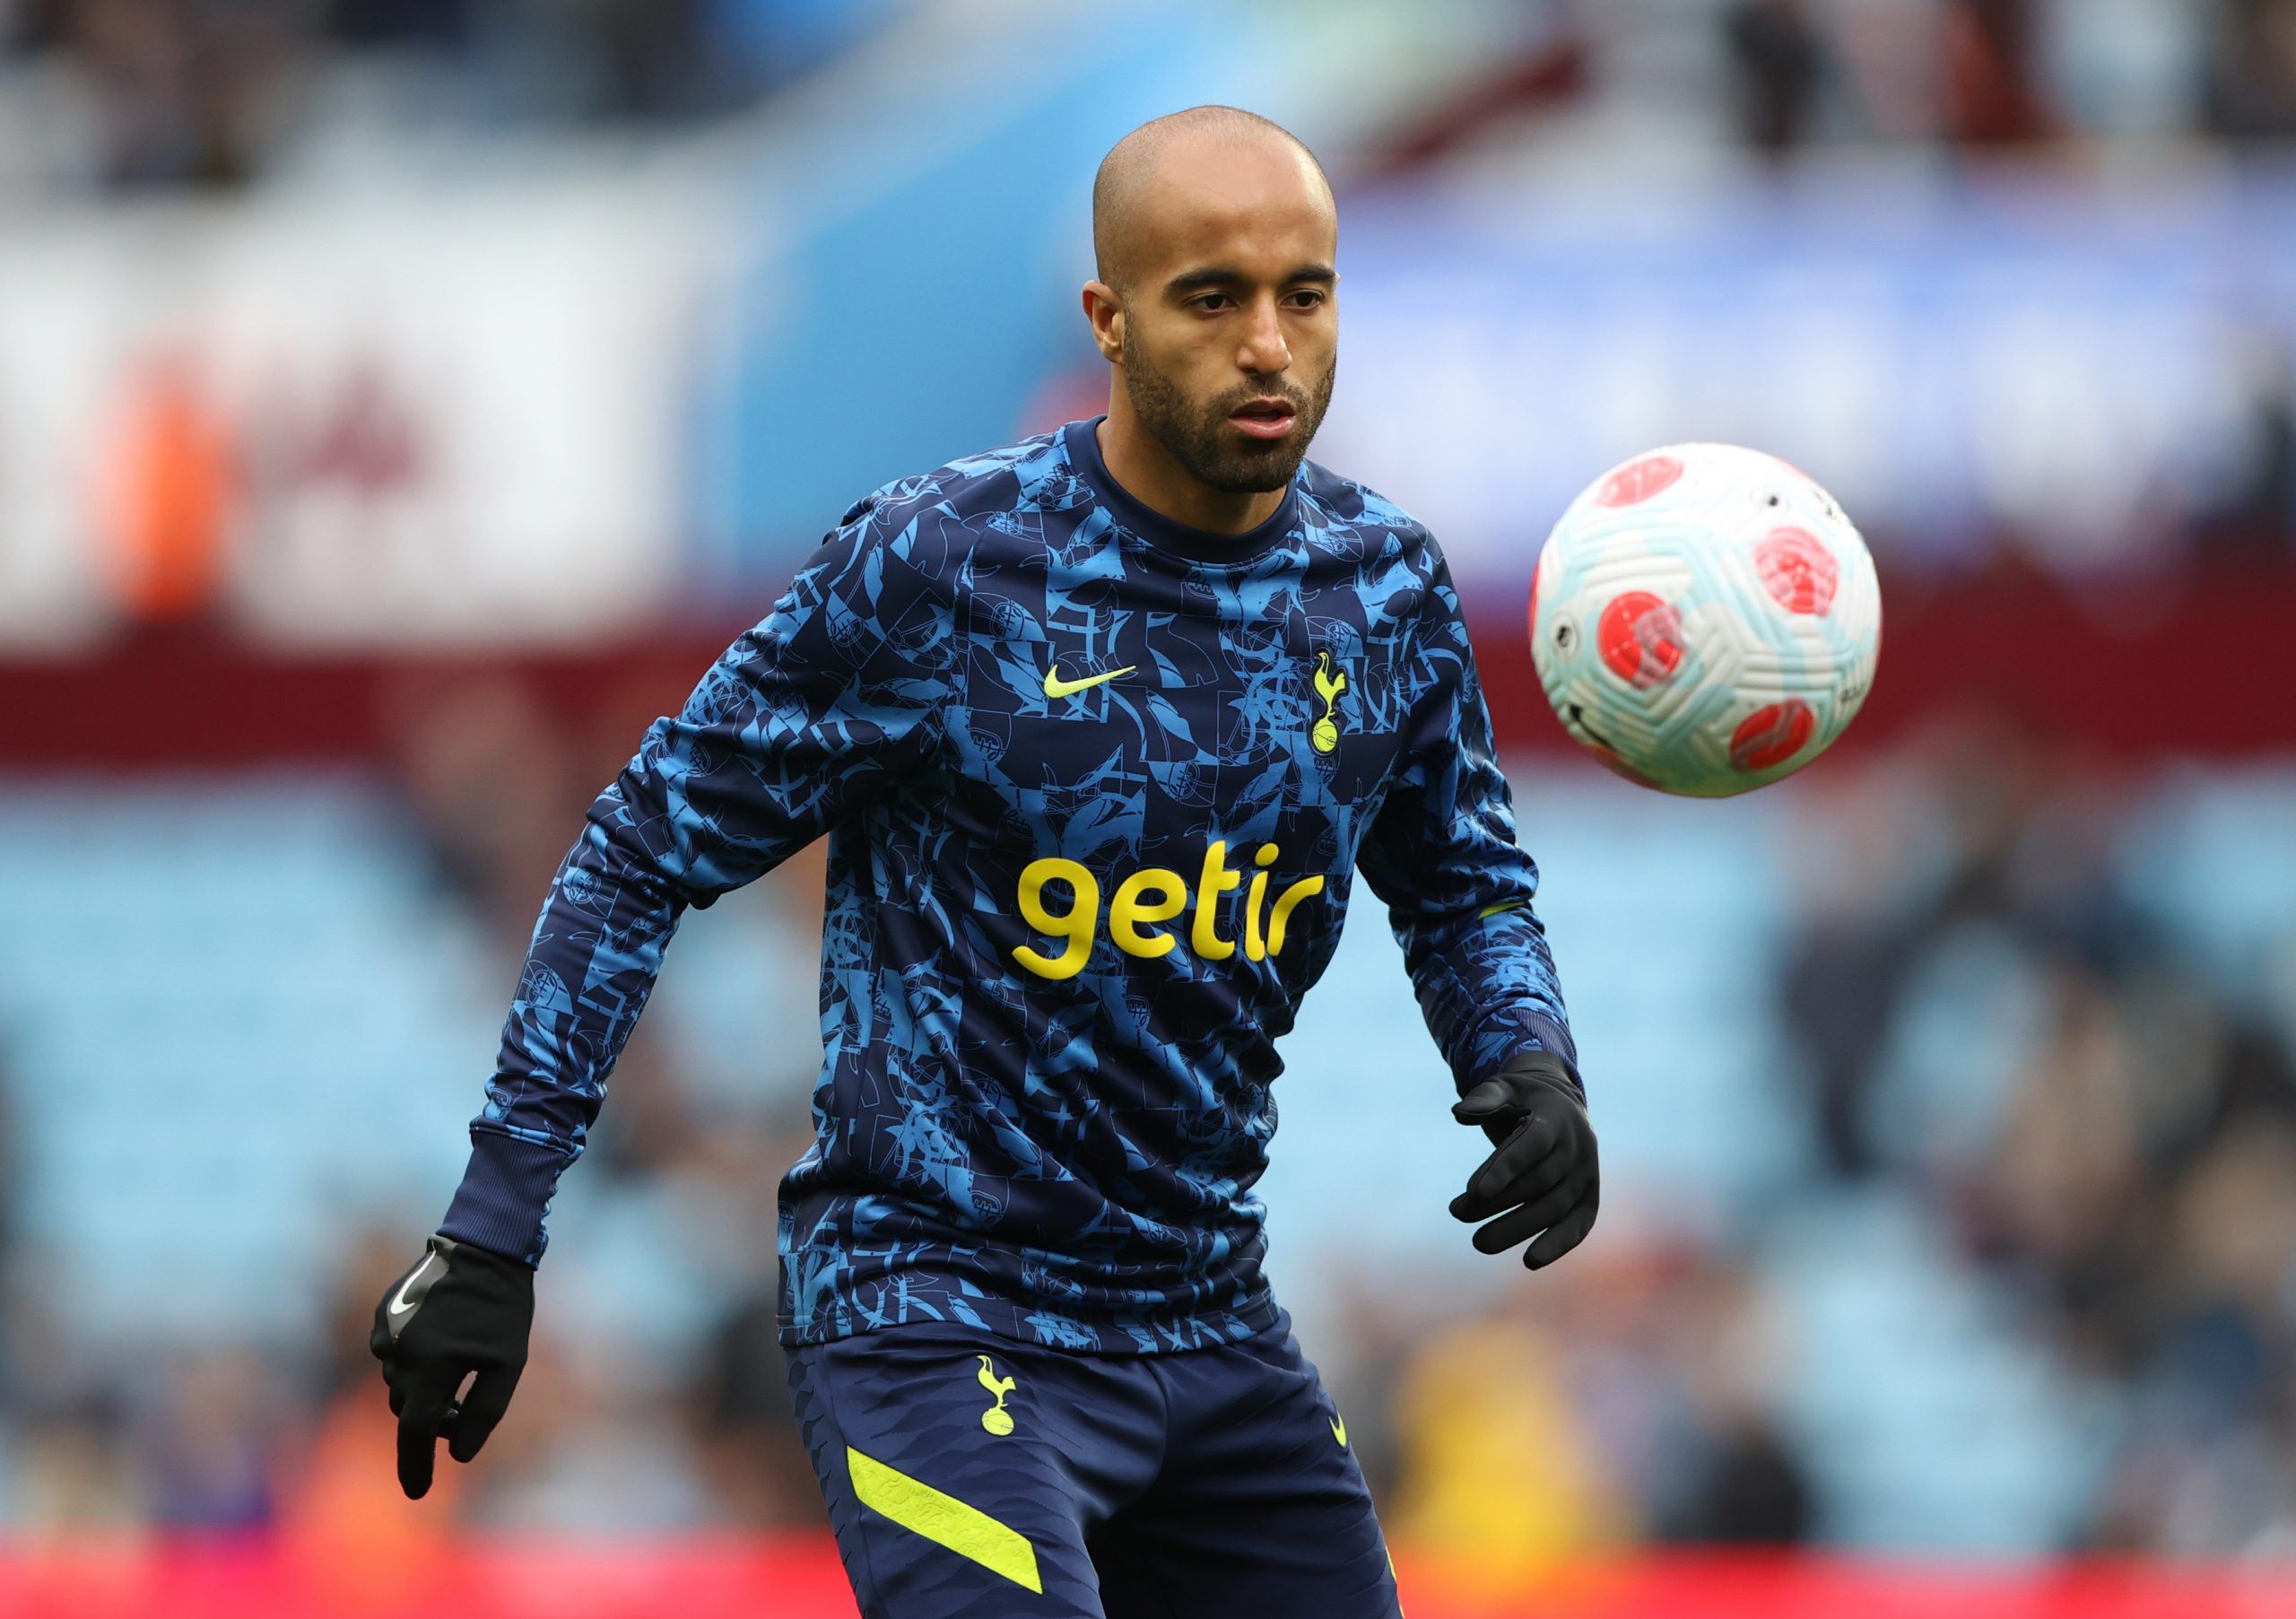 Soccer Football - Premier League - Aston Villa v Tottenham Hotspur - Villa Park, Birmingham, Britain - April 9, 2022  Tottenham Hotspur's Lucas Moura during the warm up before the match Action Images via Reuters/Molly Darlington EDITORIAL USE ONLY. No use with unauthorized audio, video, data, fixture lists, club/league logos or 'live' services. Online in-match use limited to 75 images, no video emulation. No use in betting, games or single club /league/player publications.  Please contact your a